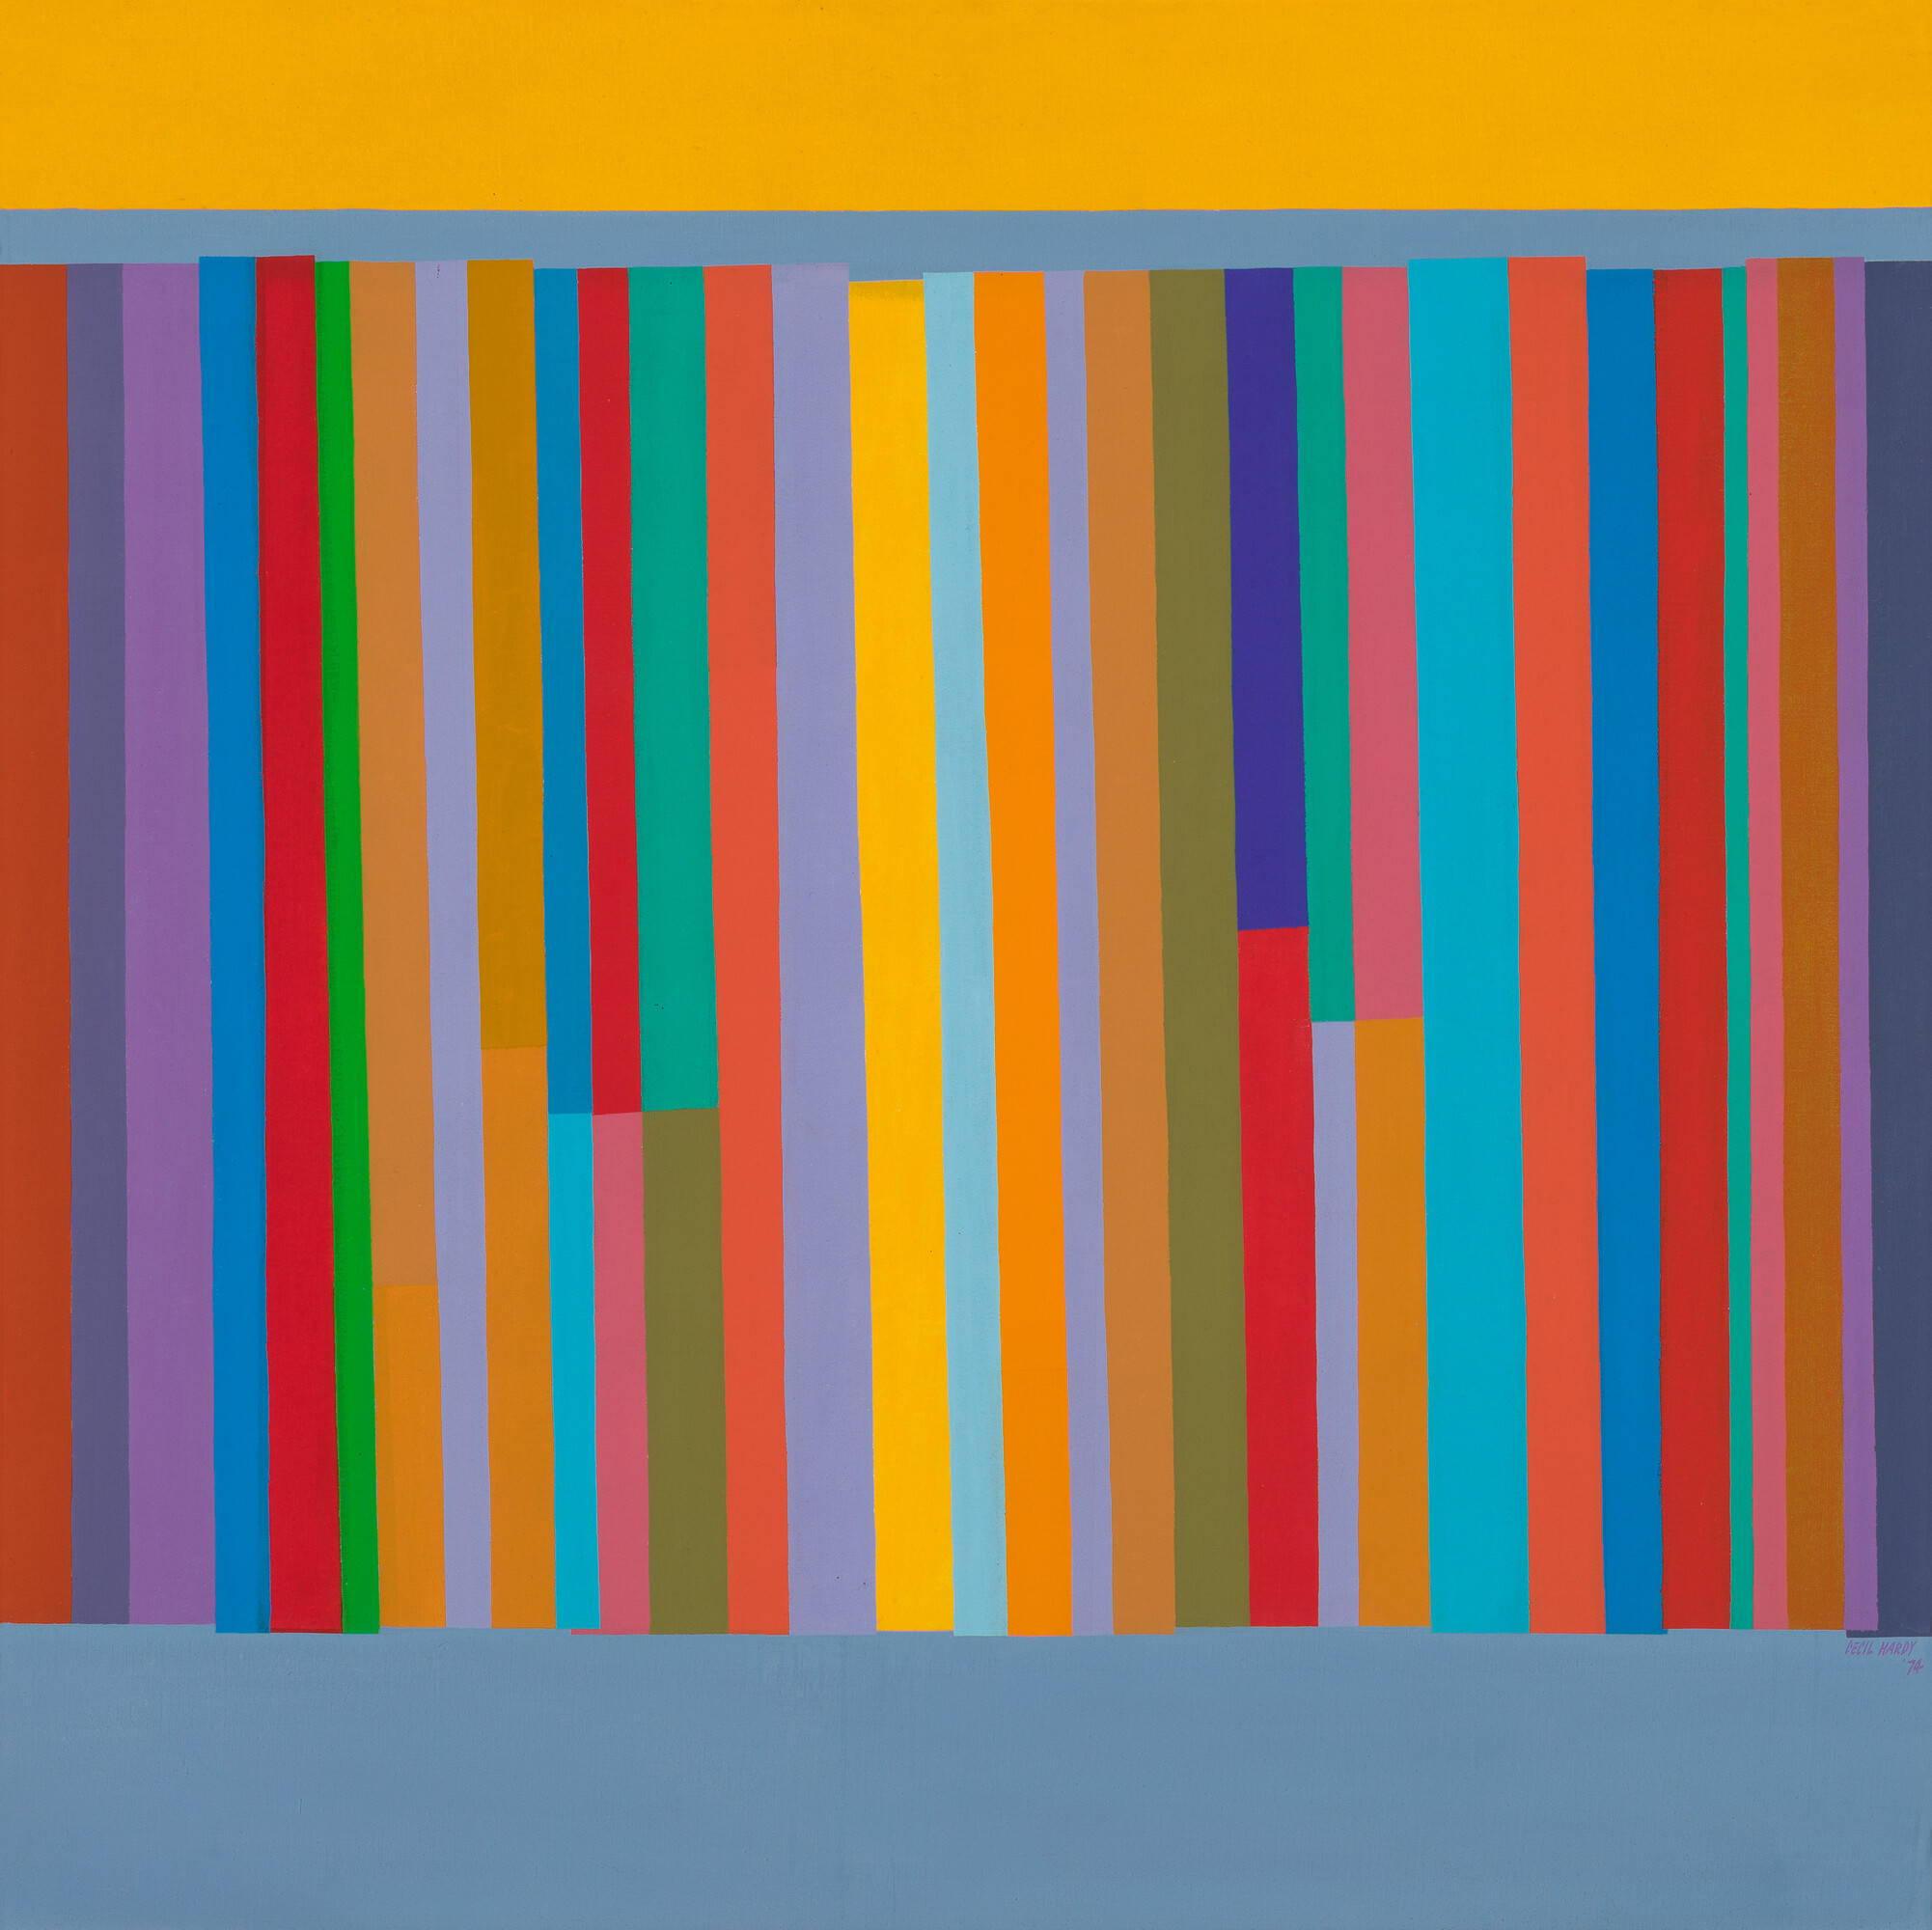 Cecil Hardy, Stockade 1, synthetic polymer paint on canvas, Warrnambool Art<br />
Gallery collection, purchased through the Caltex Oil (Australia) Pty. Ltd. Acquisitive Art Prize with the assistance of the Visual Arts Board of the Australia Council, 1974.